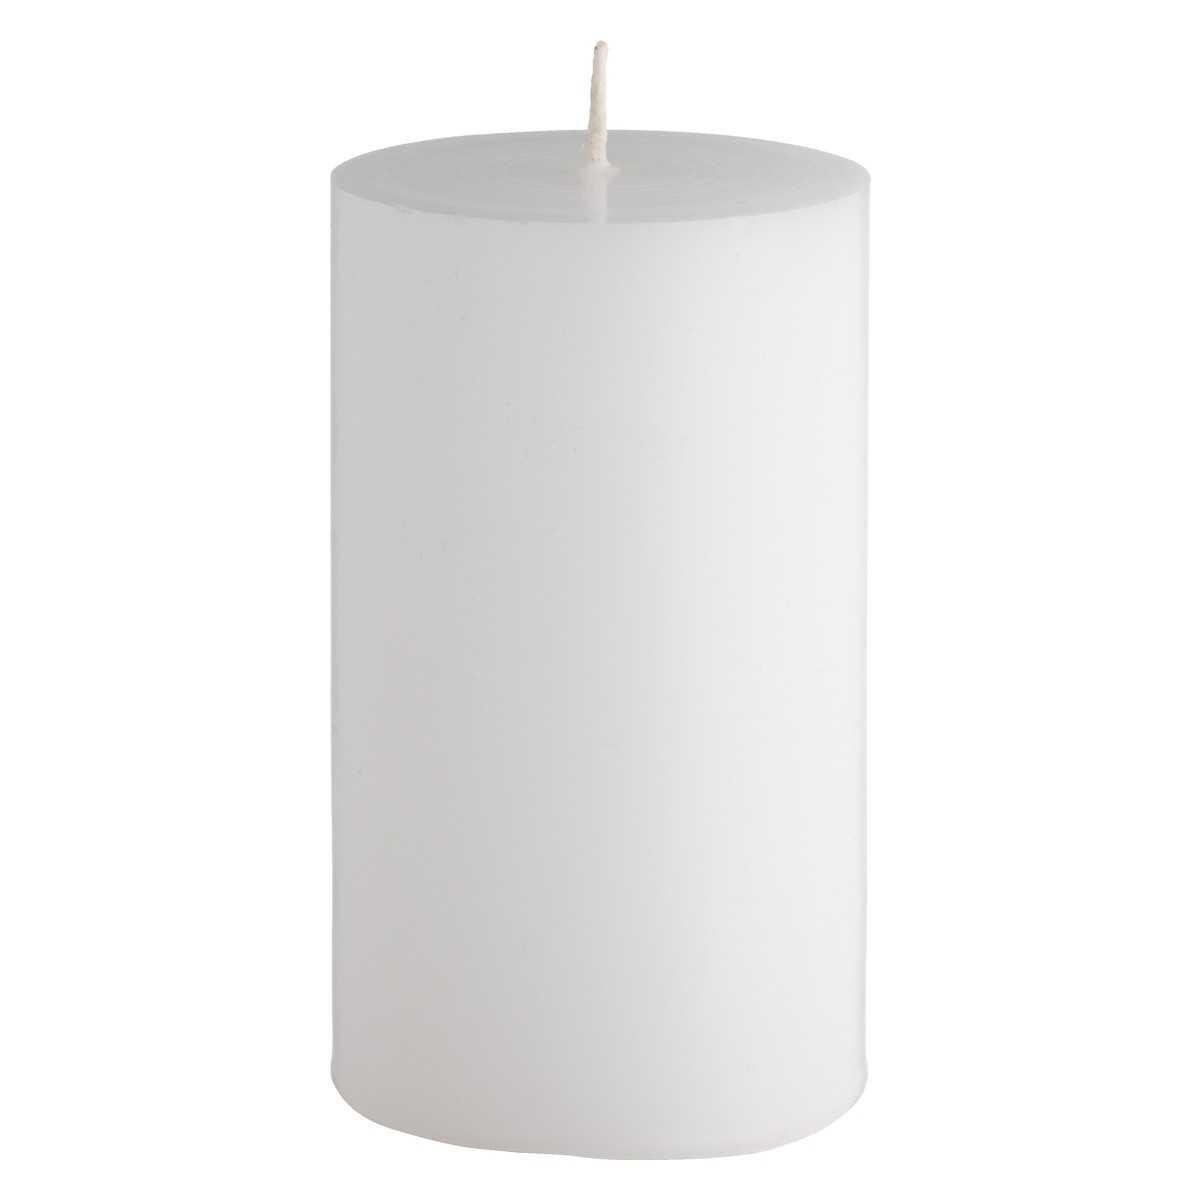 Wholesale Decorative Large Scented Cylinder Pillar Wax Candles for